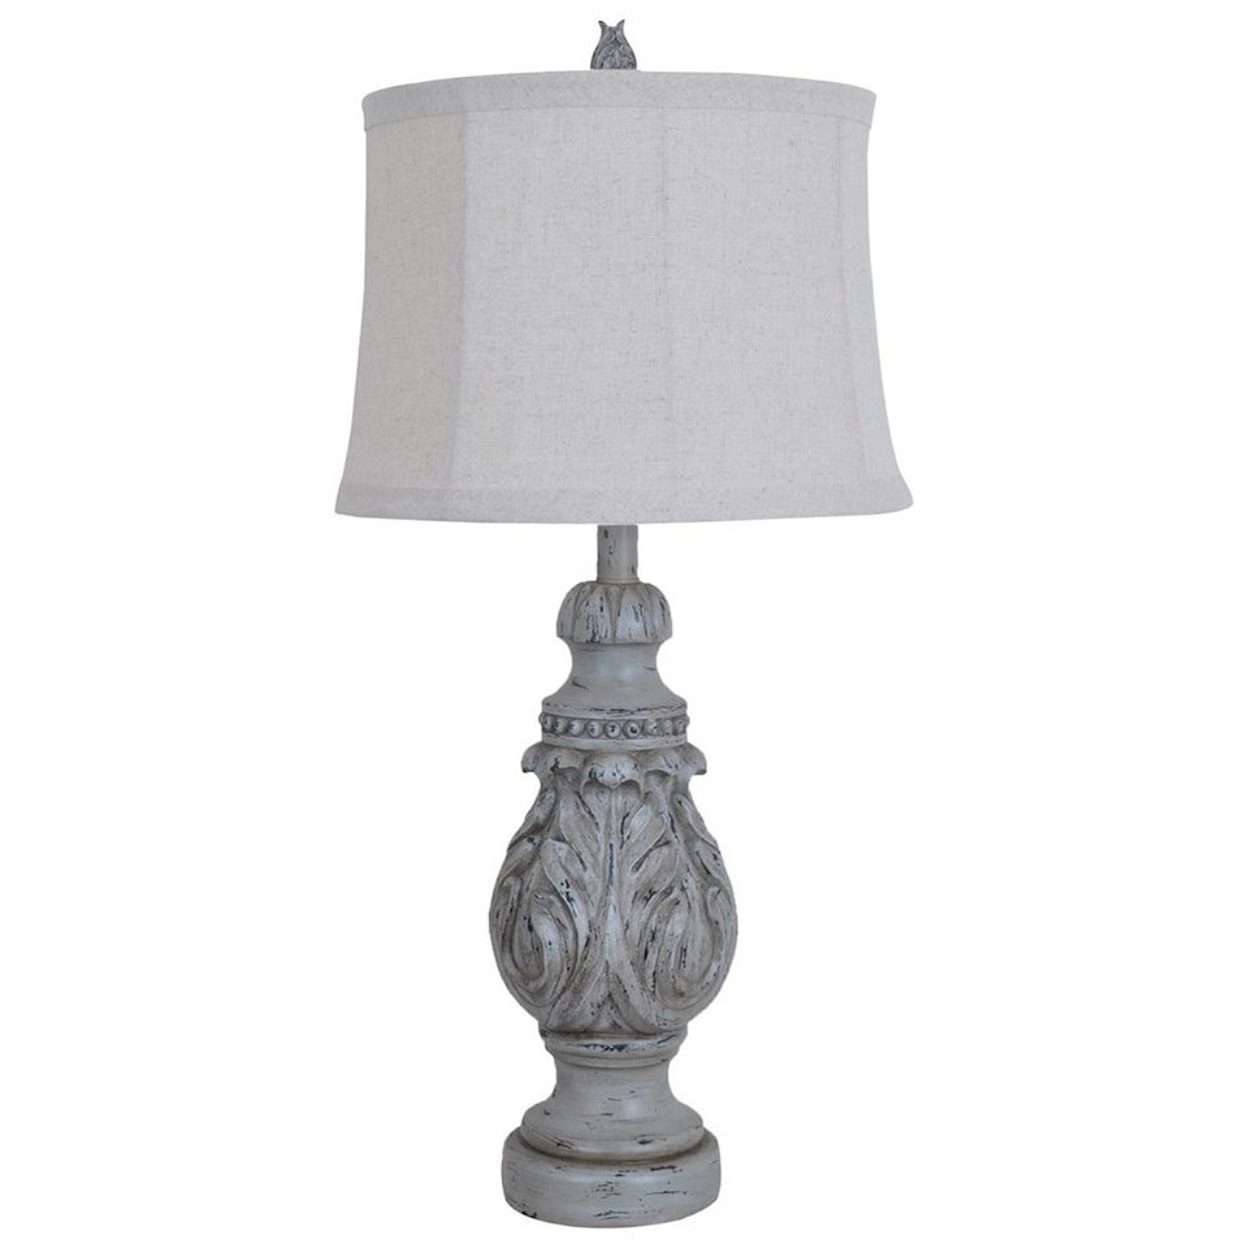 Crestview Collection Lighting Latham Table Lamp